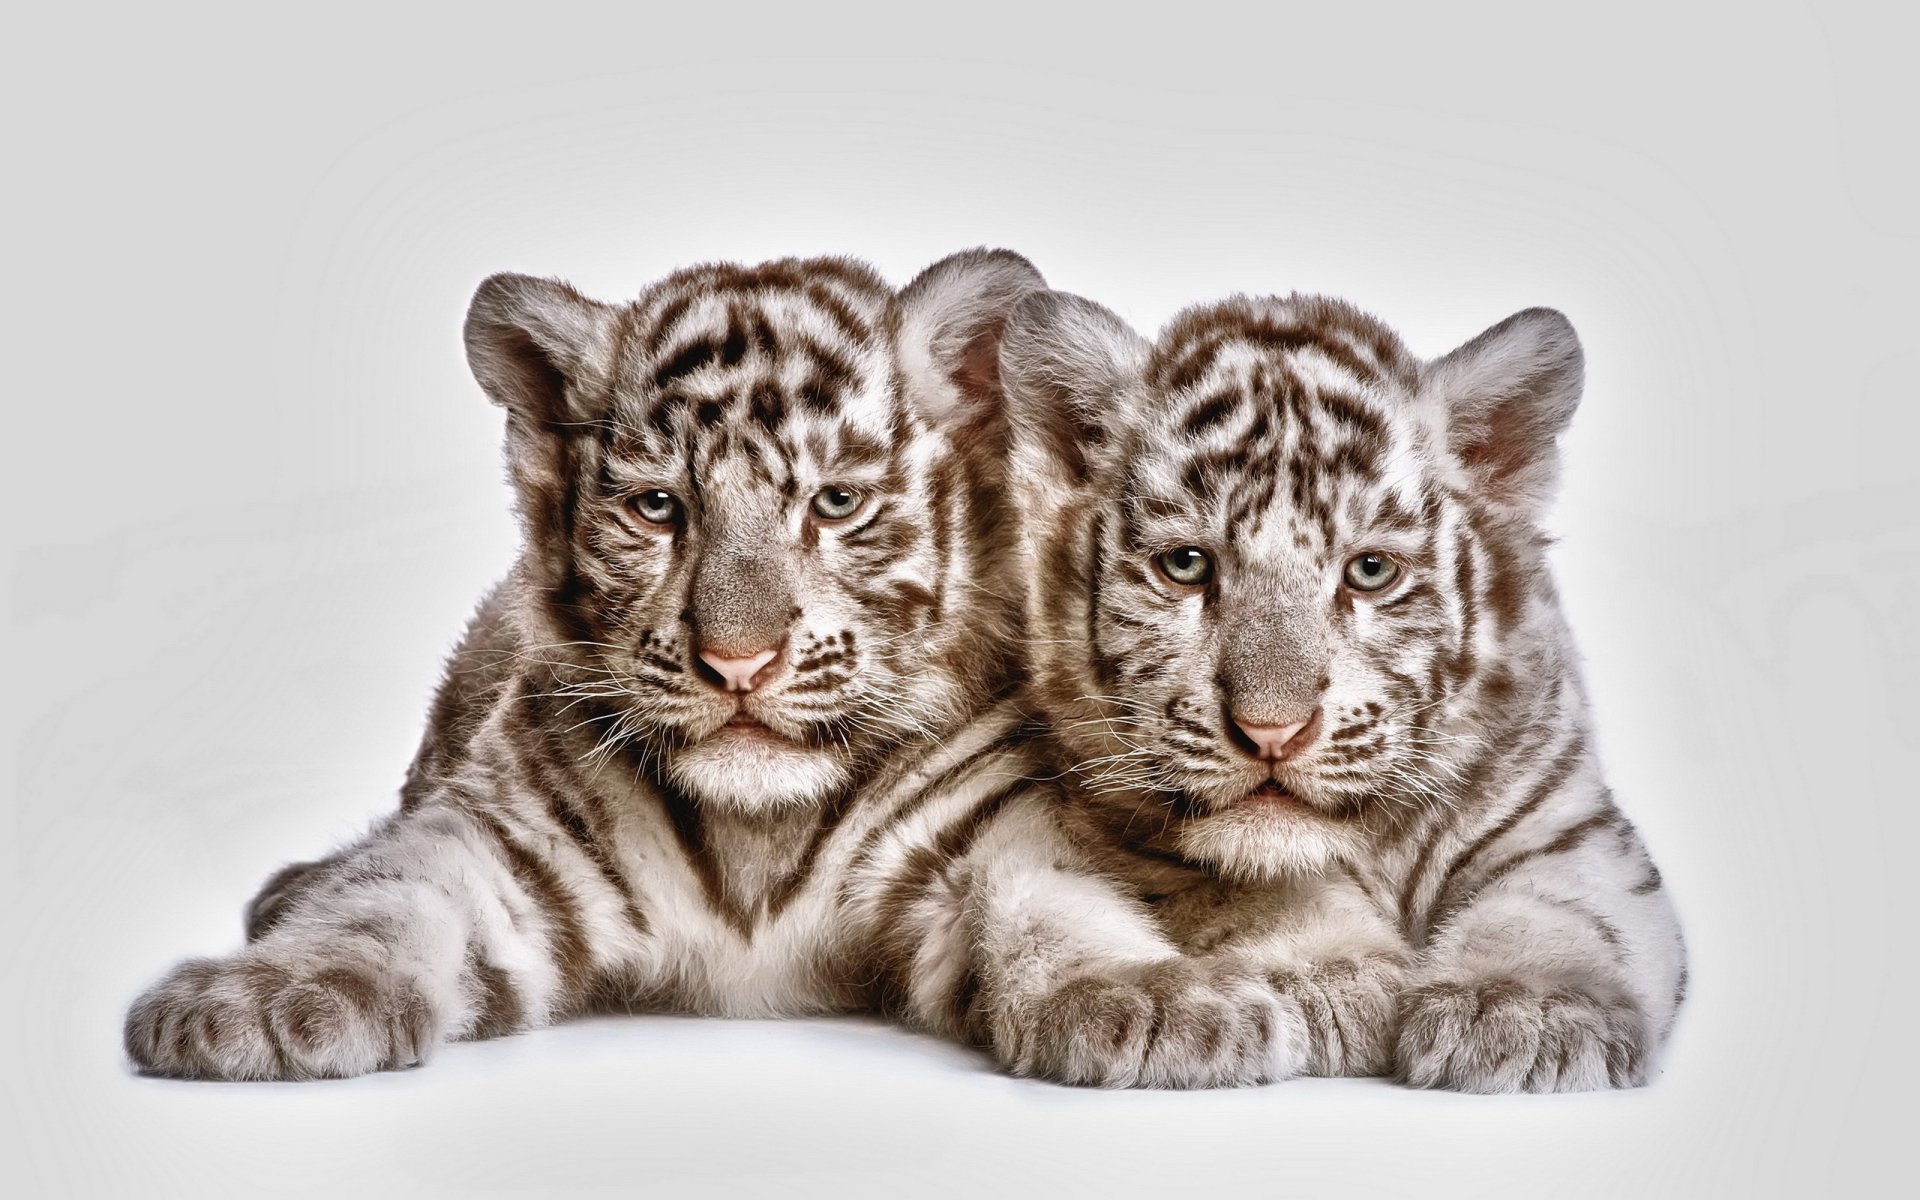 Tow Cute White Tiger Cubs Full HD Wallpaper And Background